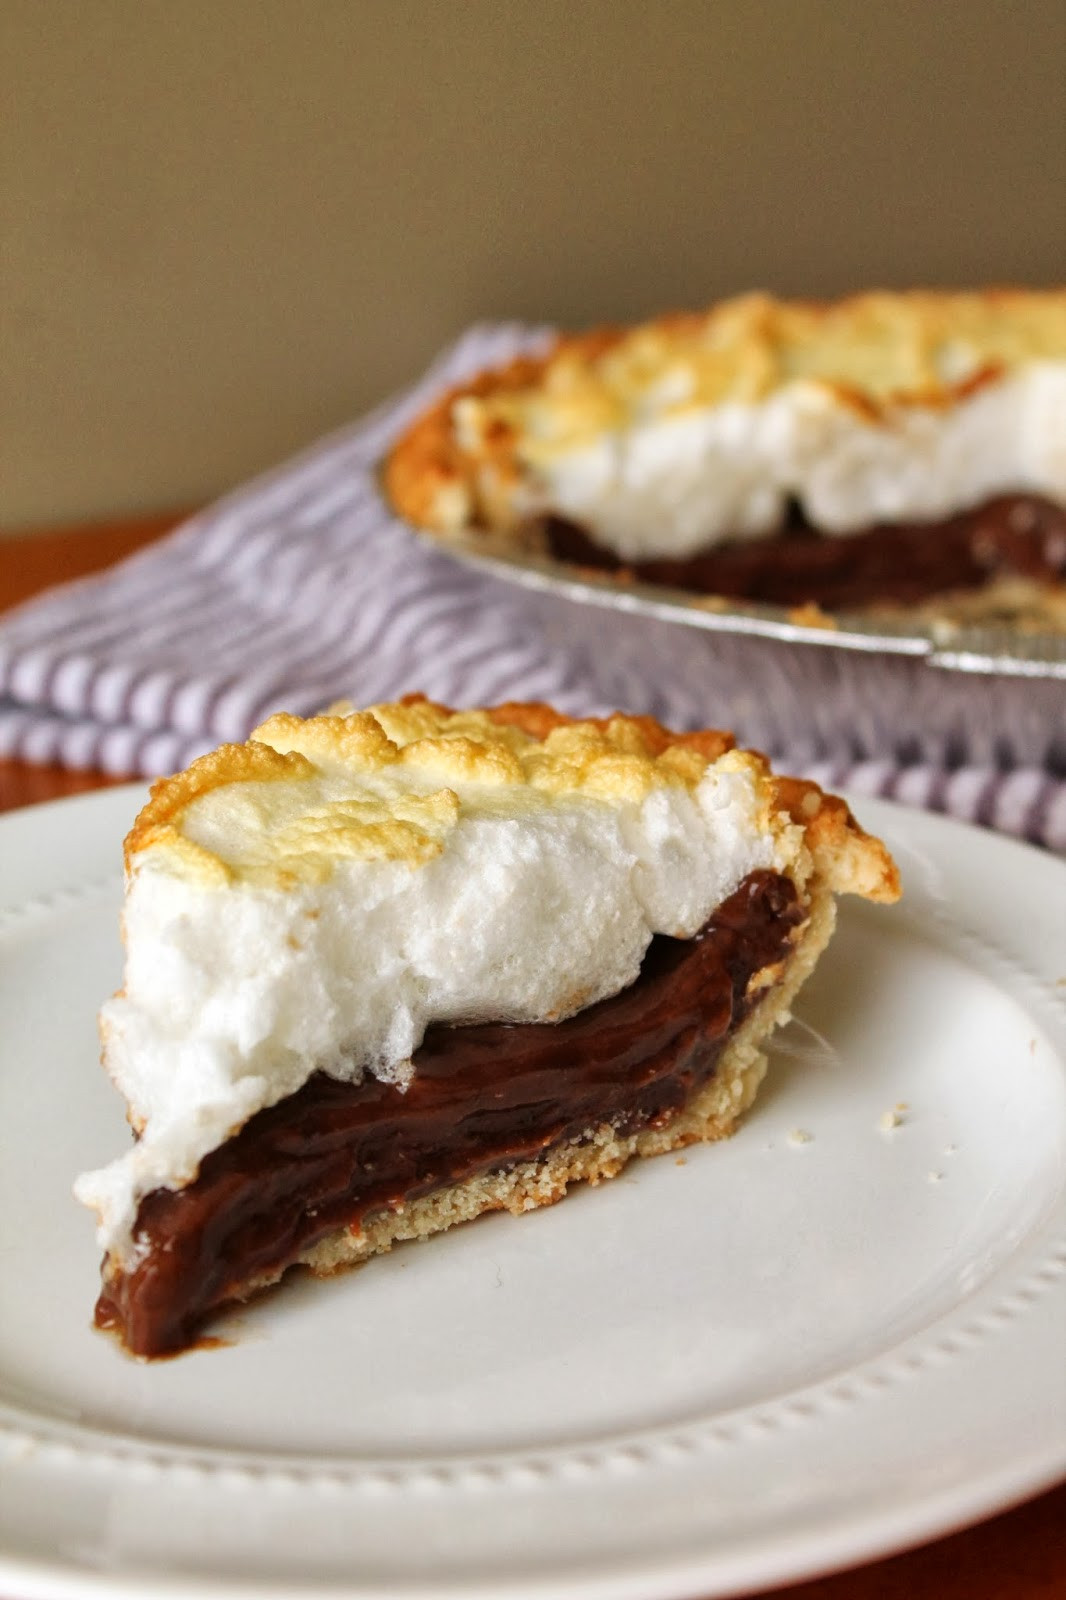 Old Fashioned Chocolate Pie Best Of Louisiana Bride Old Fashion Chocolate Pie